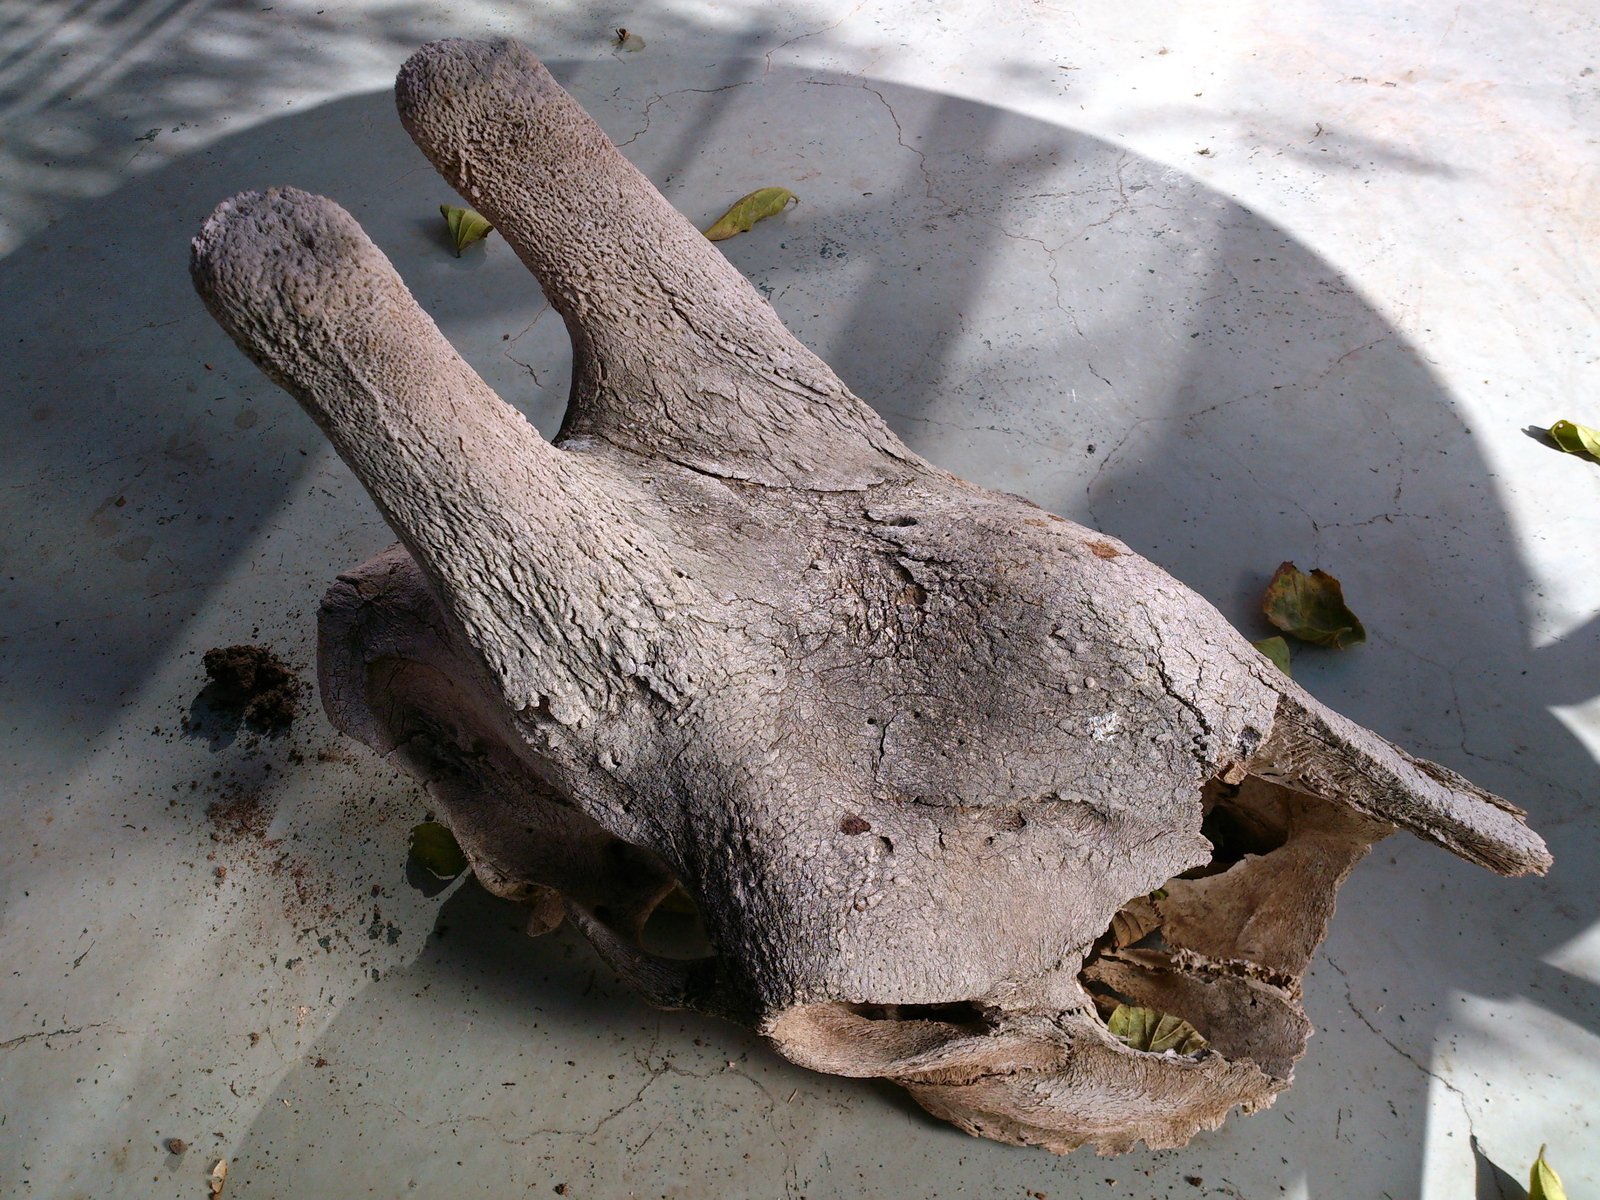 an elephant skull with very old wear sitting in a bowl